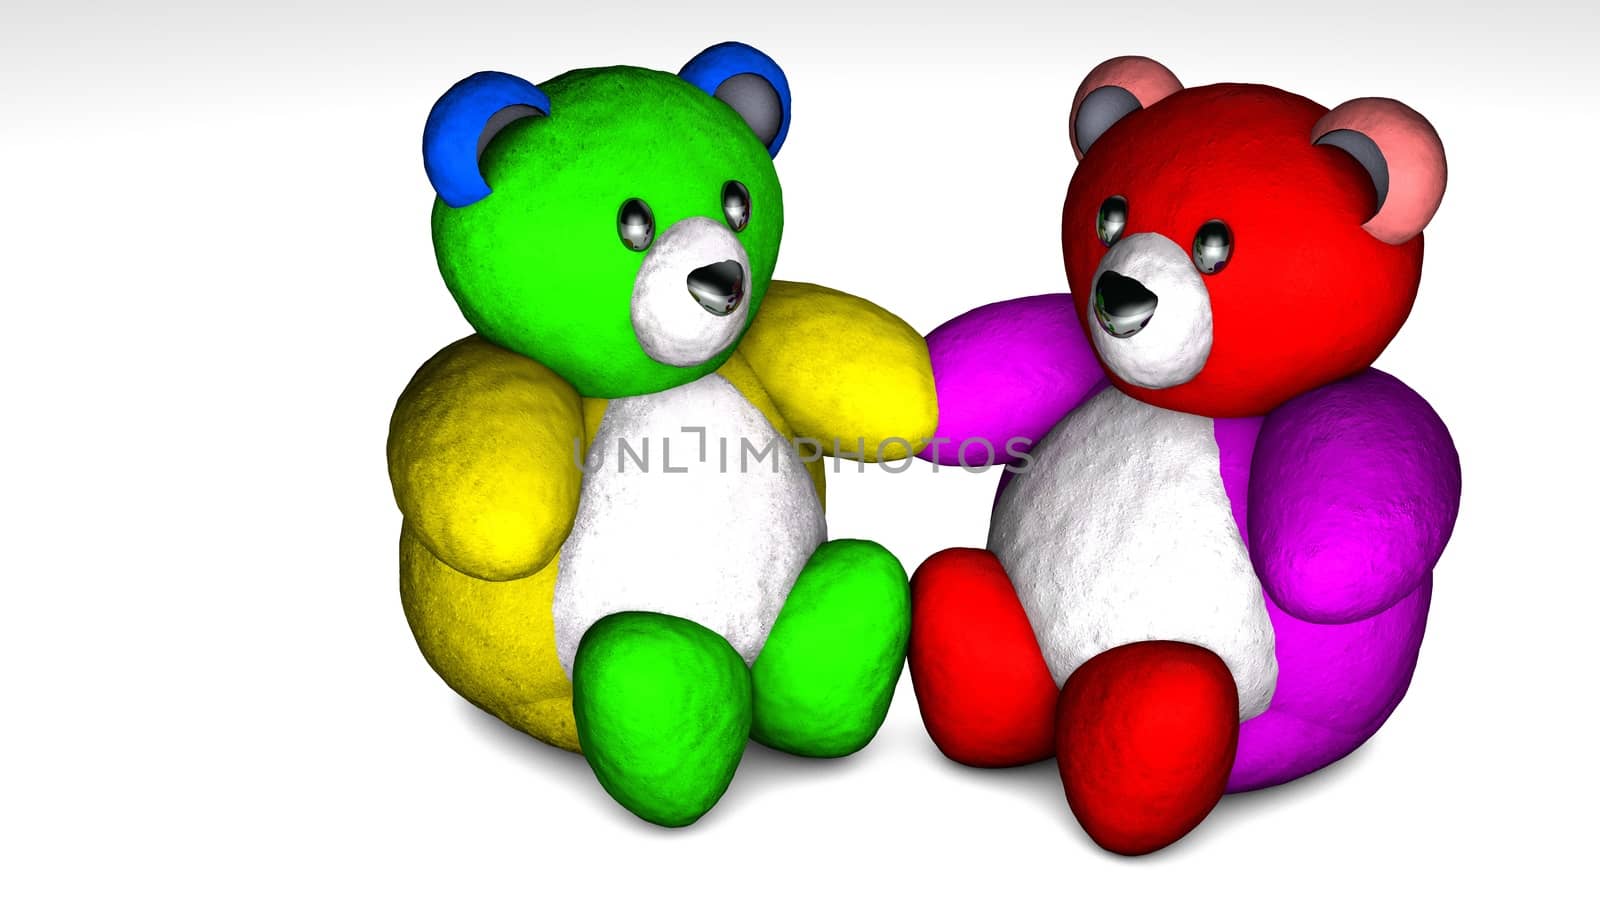 Cute baby teddy bear on beautiful background. 3D rendered colorful teddy bear sitting on floor against grey background